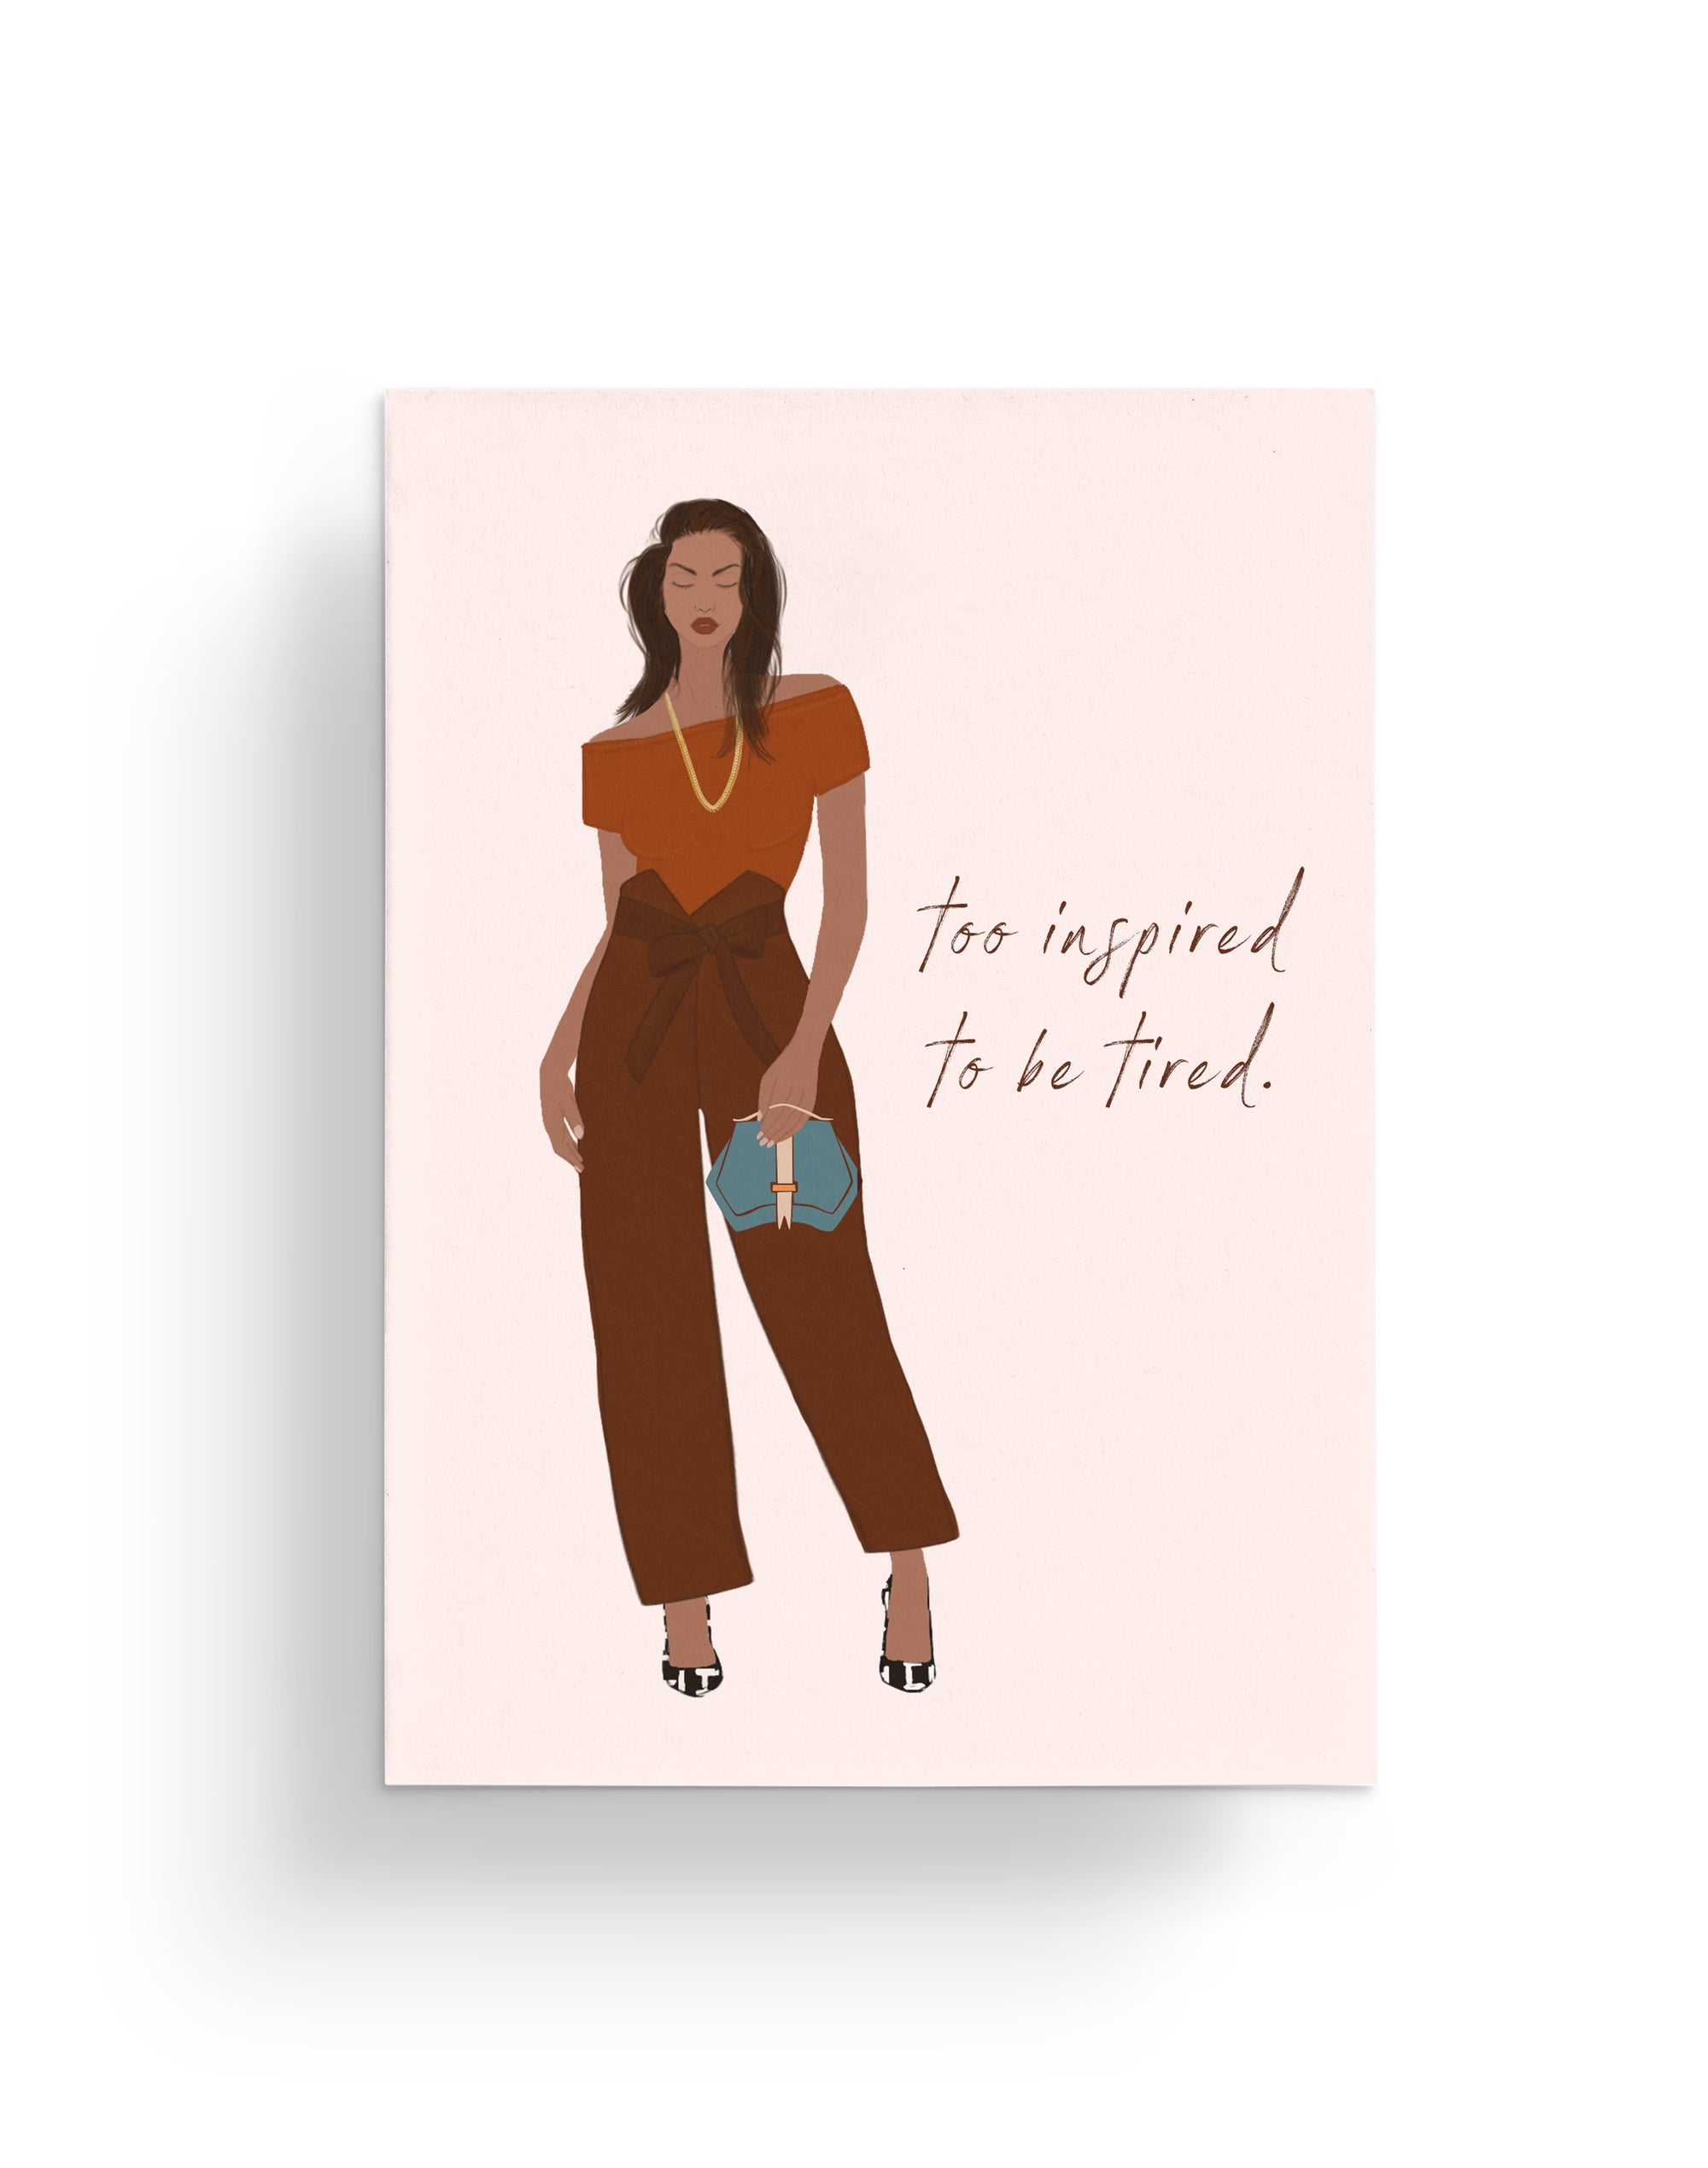 "Too Inspired" Everyday Greeting Card